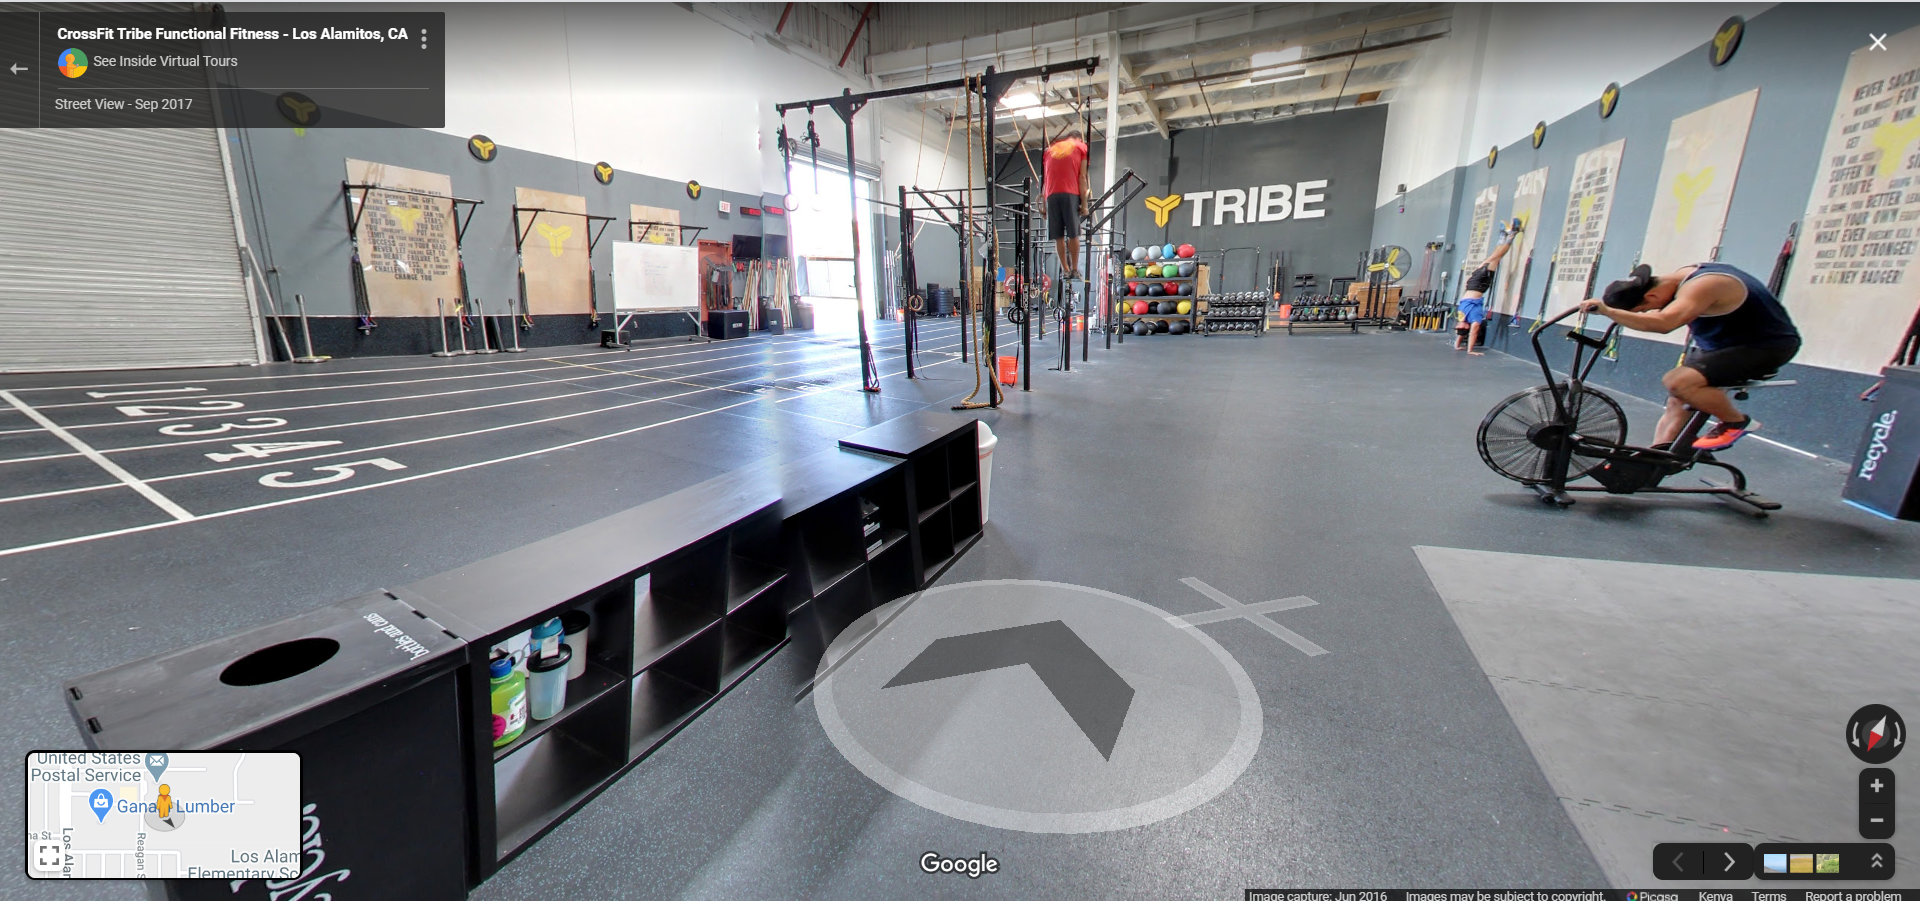 CrossFit Tribe Functional Fitness - Los Alamitos